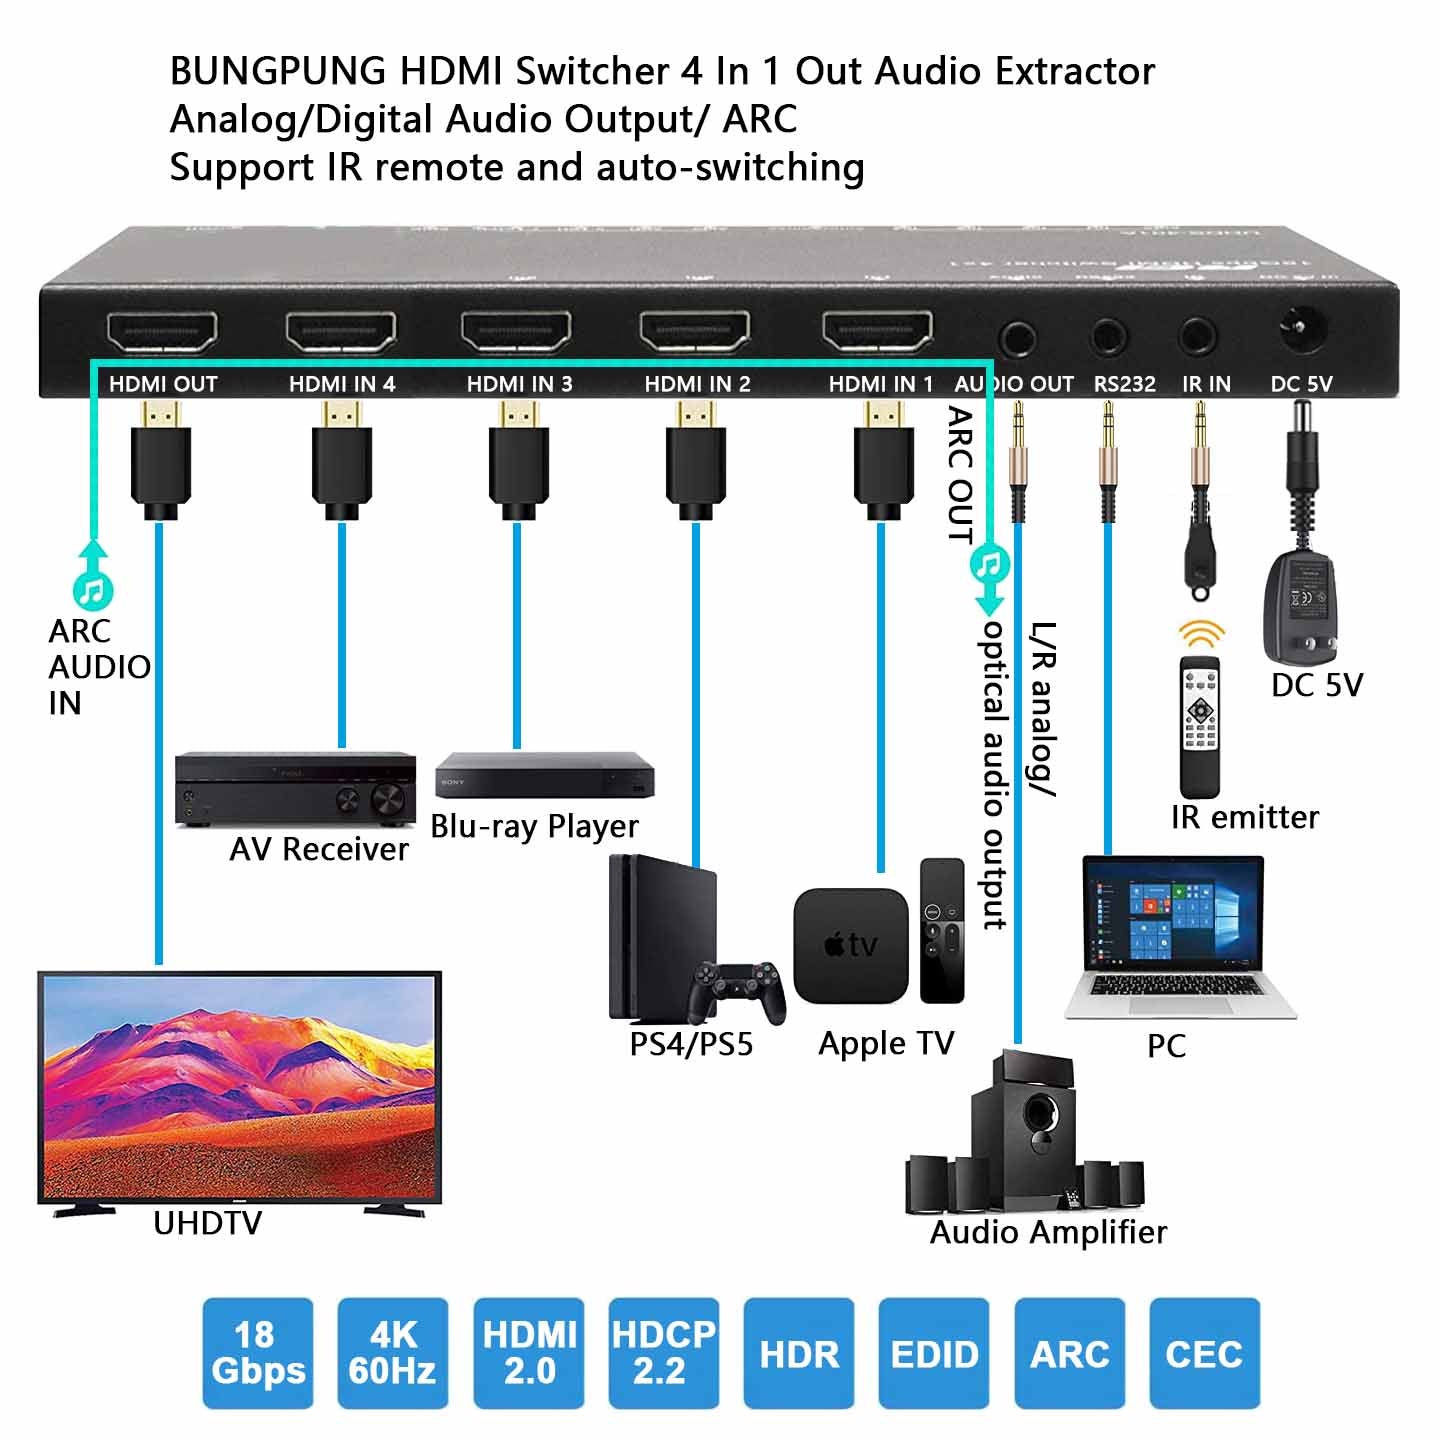 HDMI Switch 4 in 1 out 4K 60Hz Audio Extractor connection